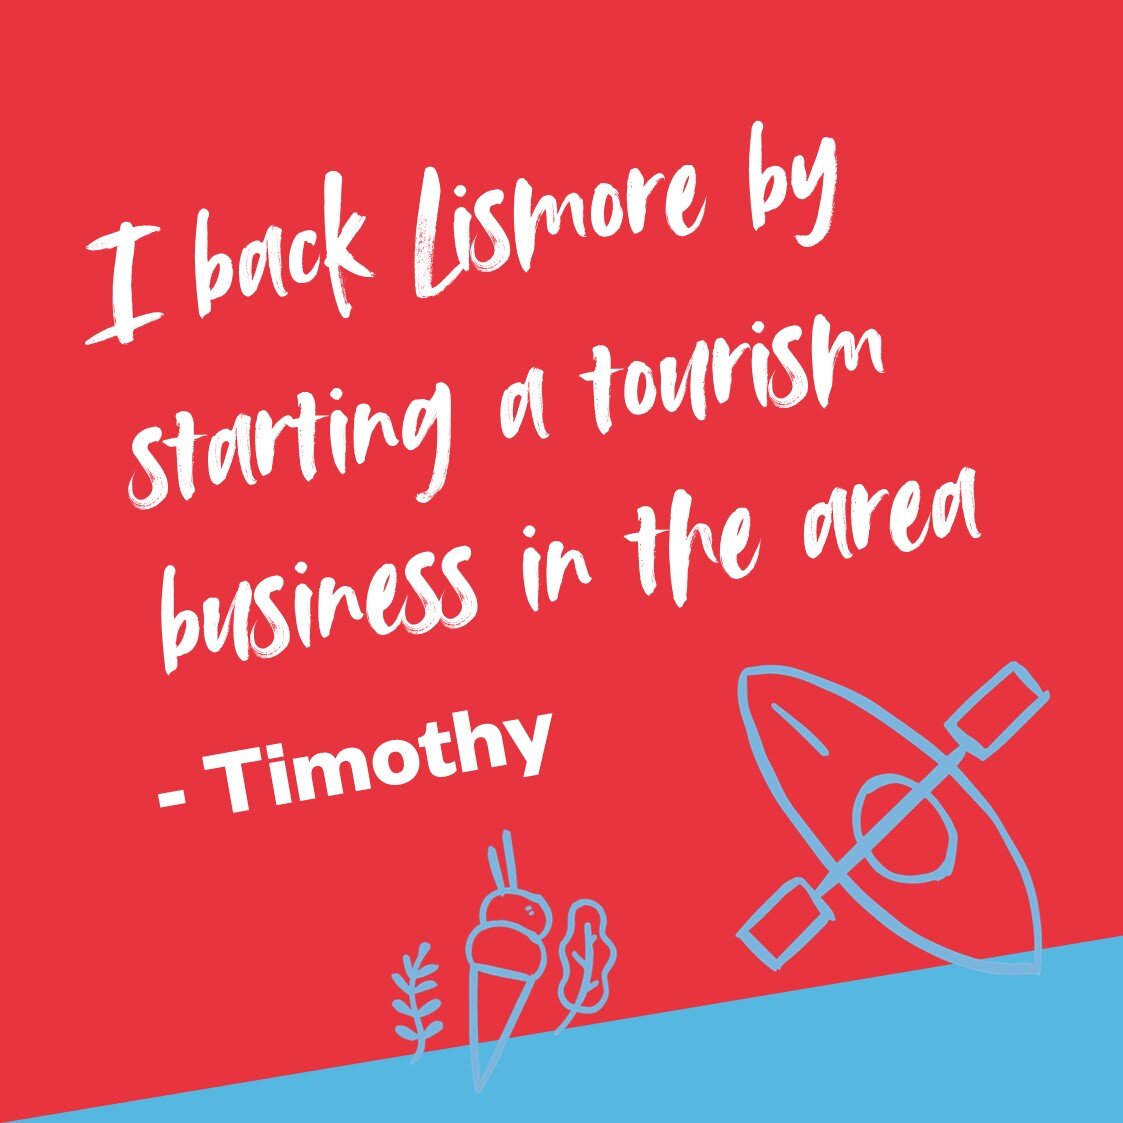 We love hearing about new businesses, like Timothy, starting up in Lismore. How about you? Tag a new business below, who has just opened in the Lismore region! 

For more inspiration on how to back Lismore, go to www.backlismore.com.au. 
#BackLismore